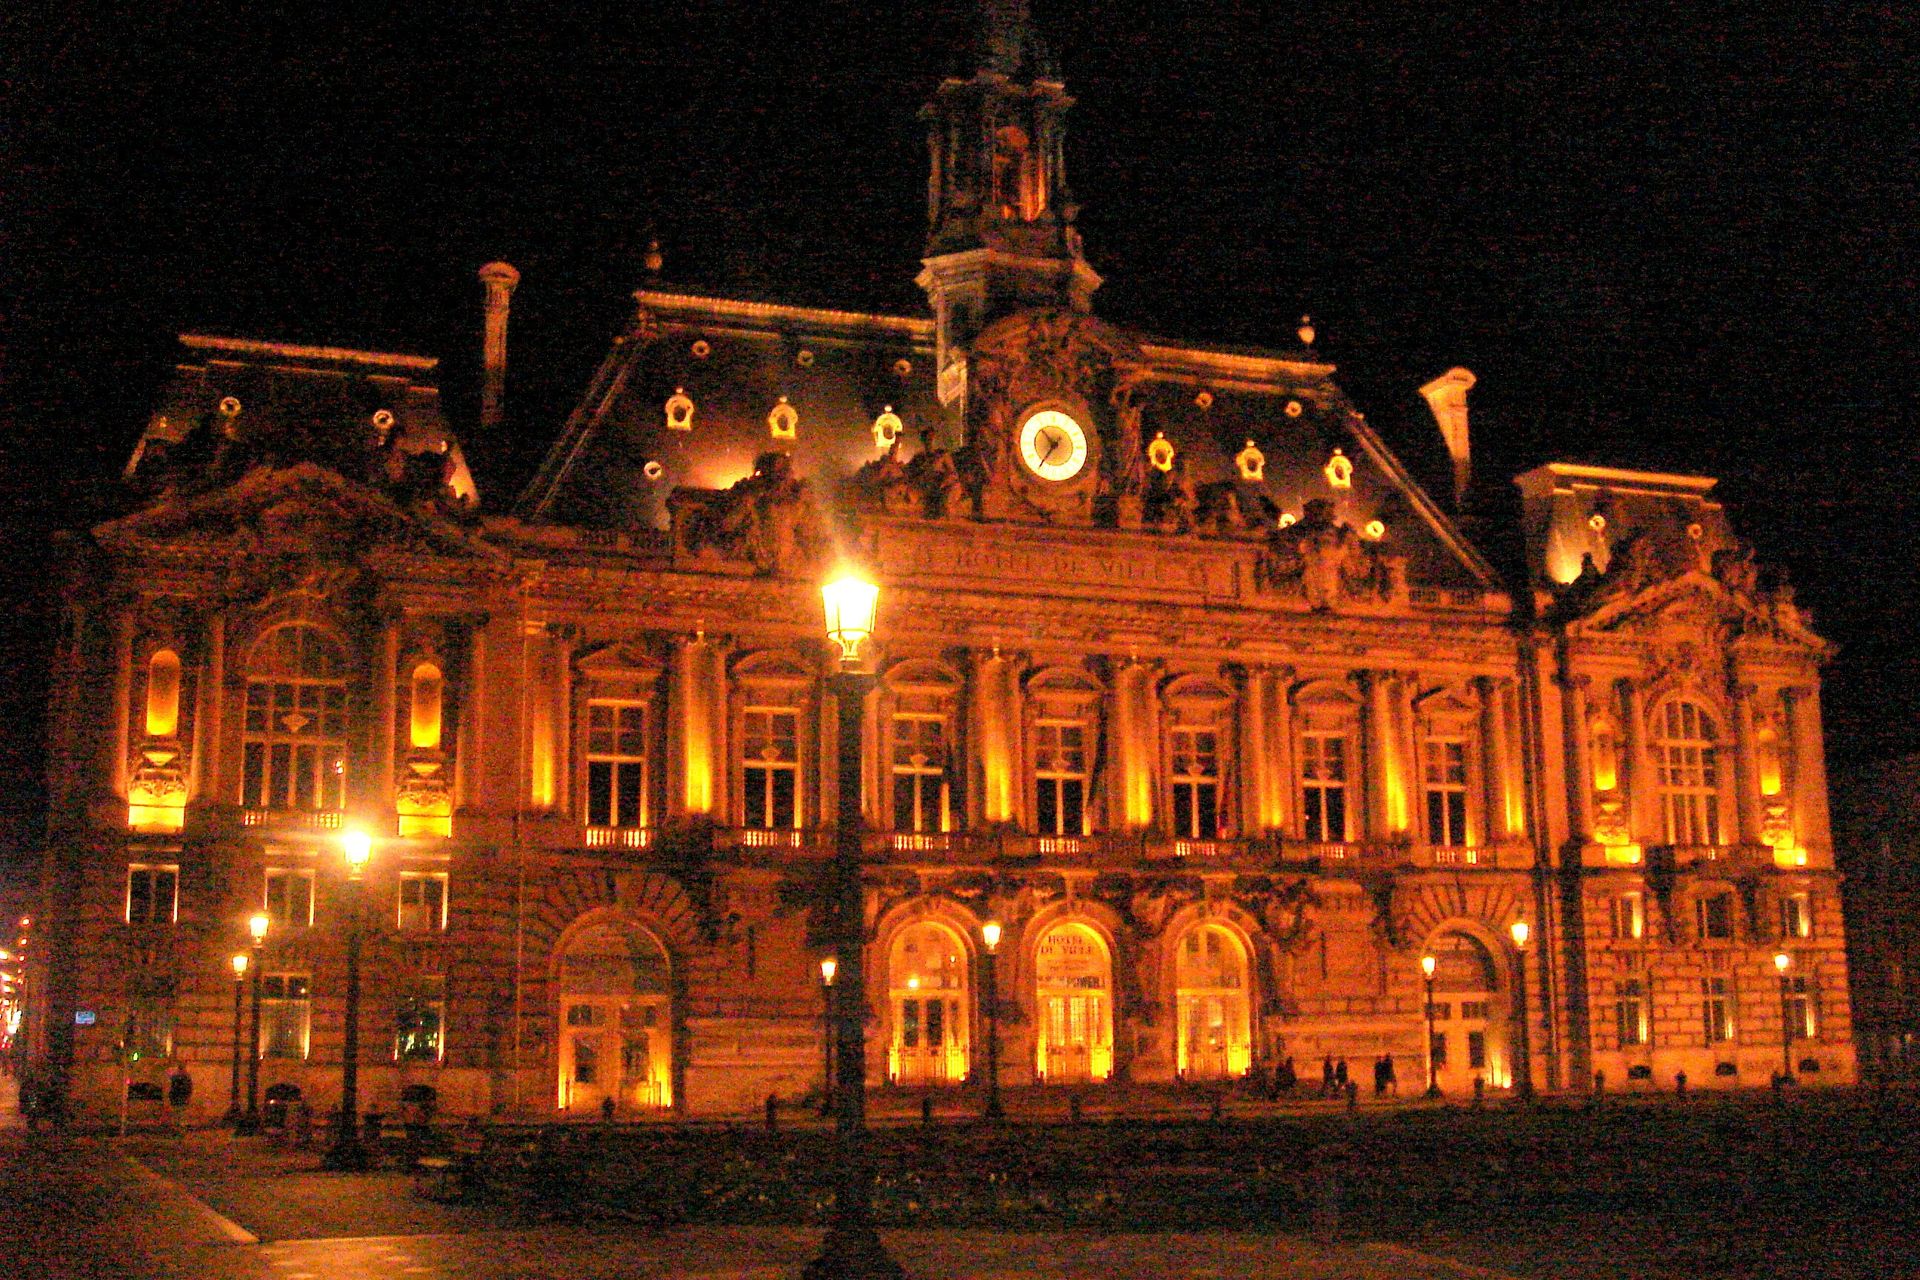 Hotel de Ville at night in Tours